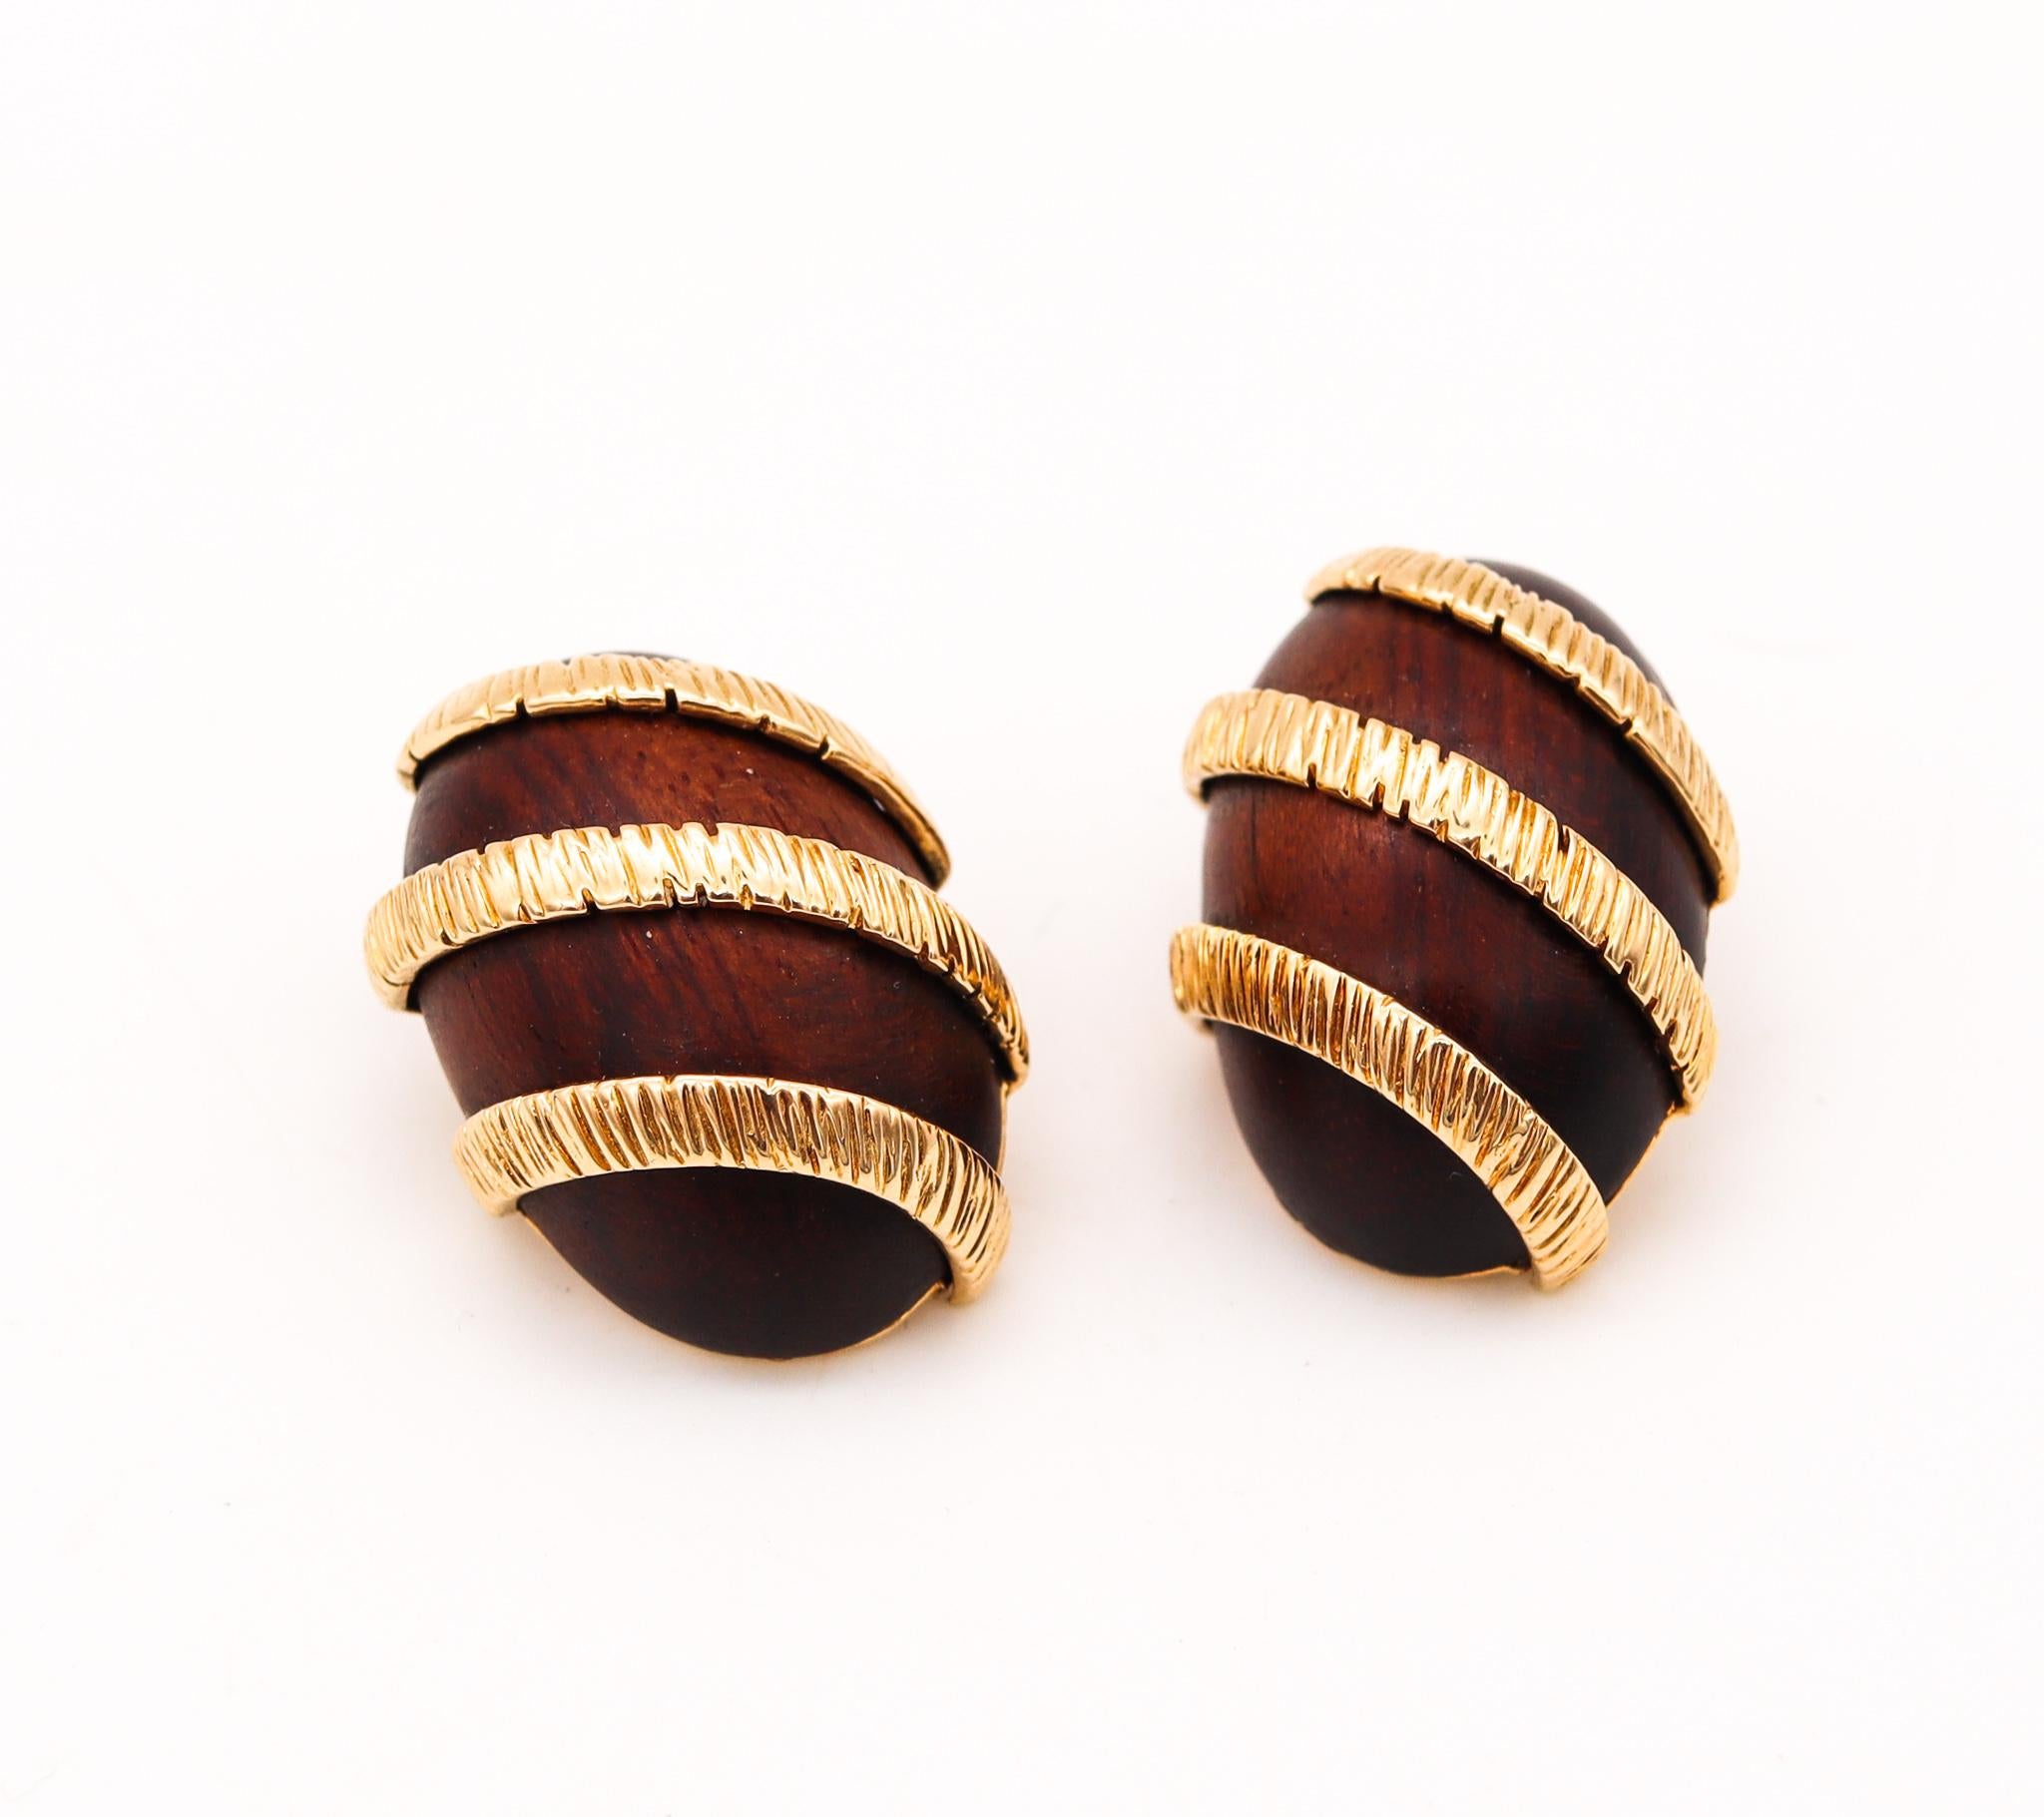 Modernist Cartier Paris 1970 Very Rare Earrings in Textured 18Kt Gold and Carved Rose Wood For Sale